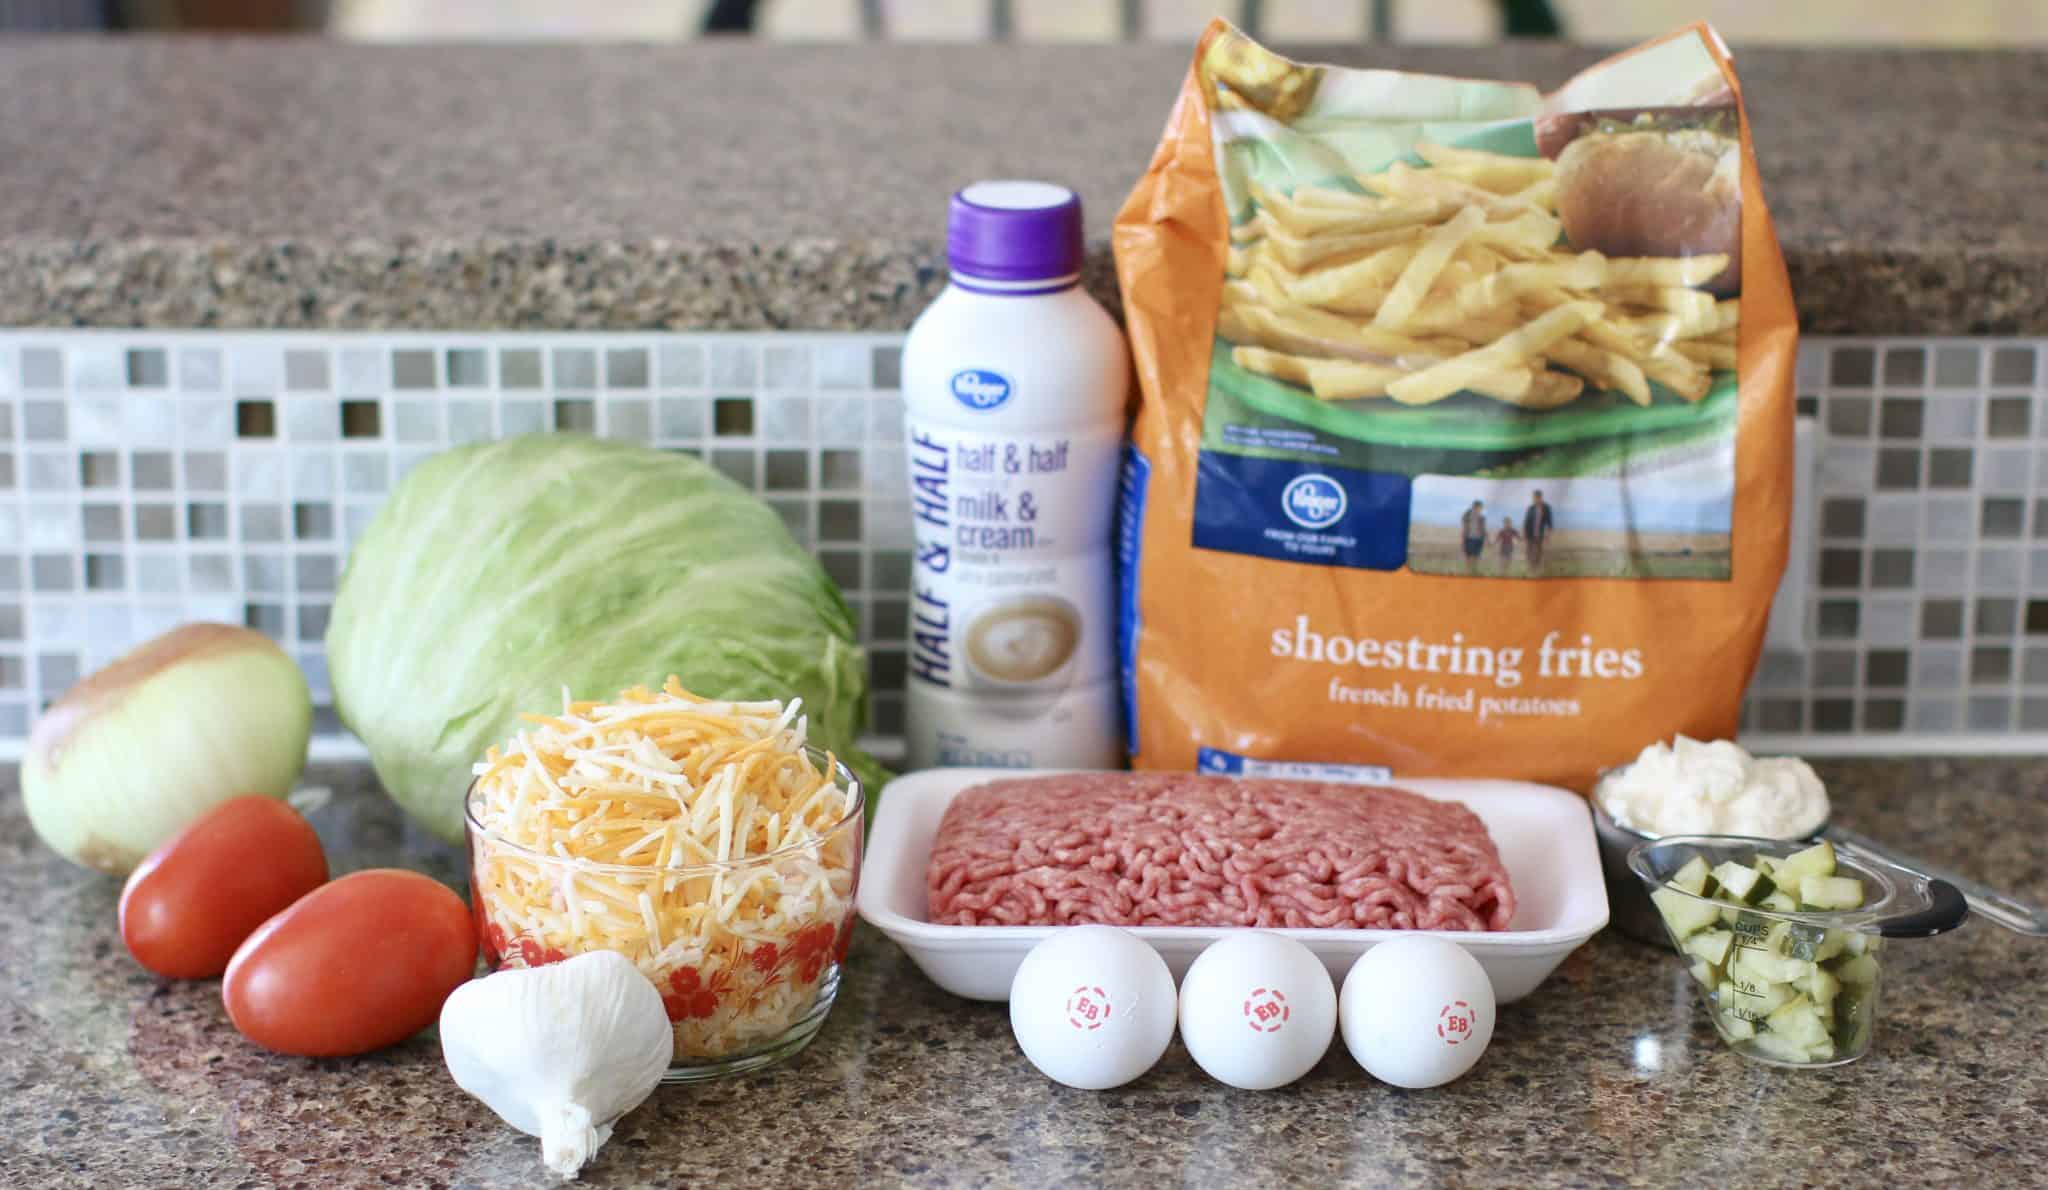 Ingredients needed to make Cheeseburger and Fries Casserole: ground beef, salt and pepper, garlic, dill pickle, eggs, mayonnaise, half and half, shredded cheese, frozen French fries.